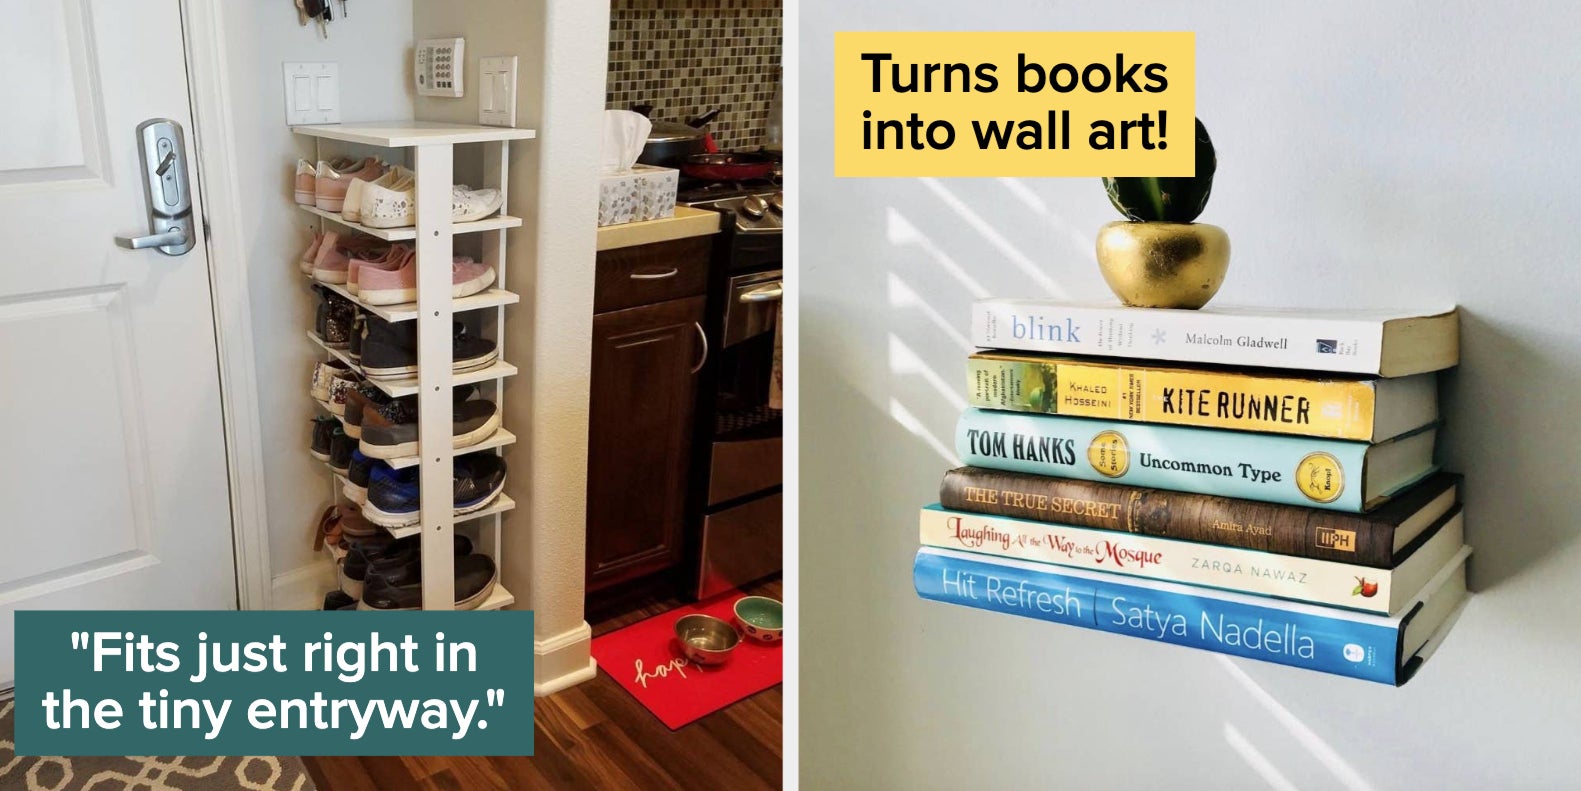 41 Things People With Small Apartments Actually Use